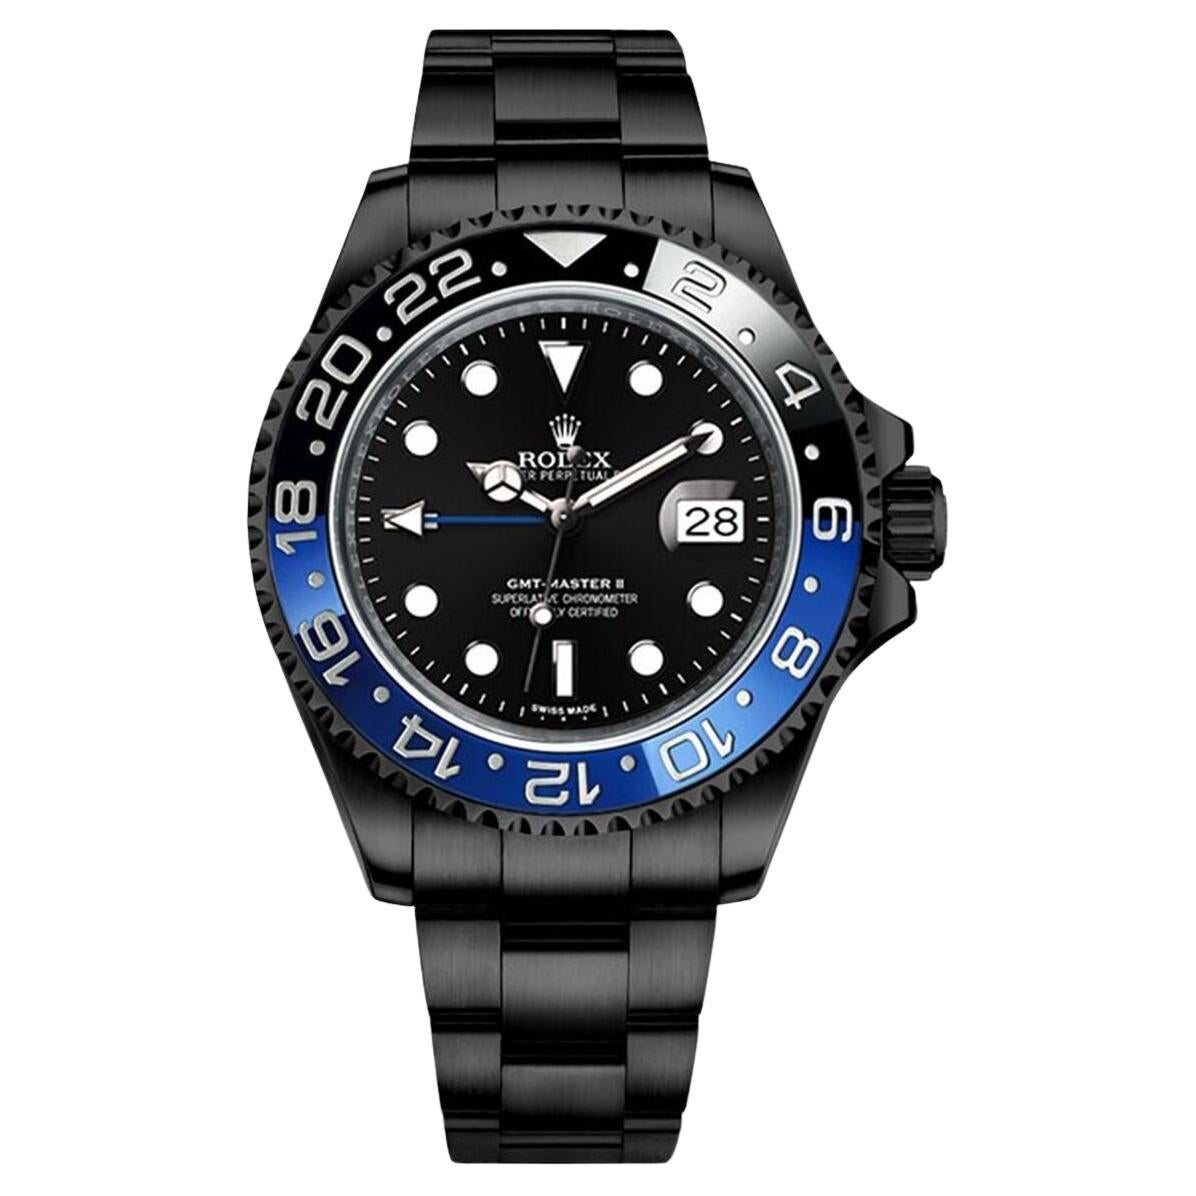 Rolex GMT-Master II Black PVD/DLC Coated Stainless Steel Watch 116710BLNR For Sale